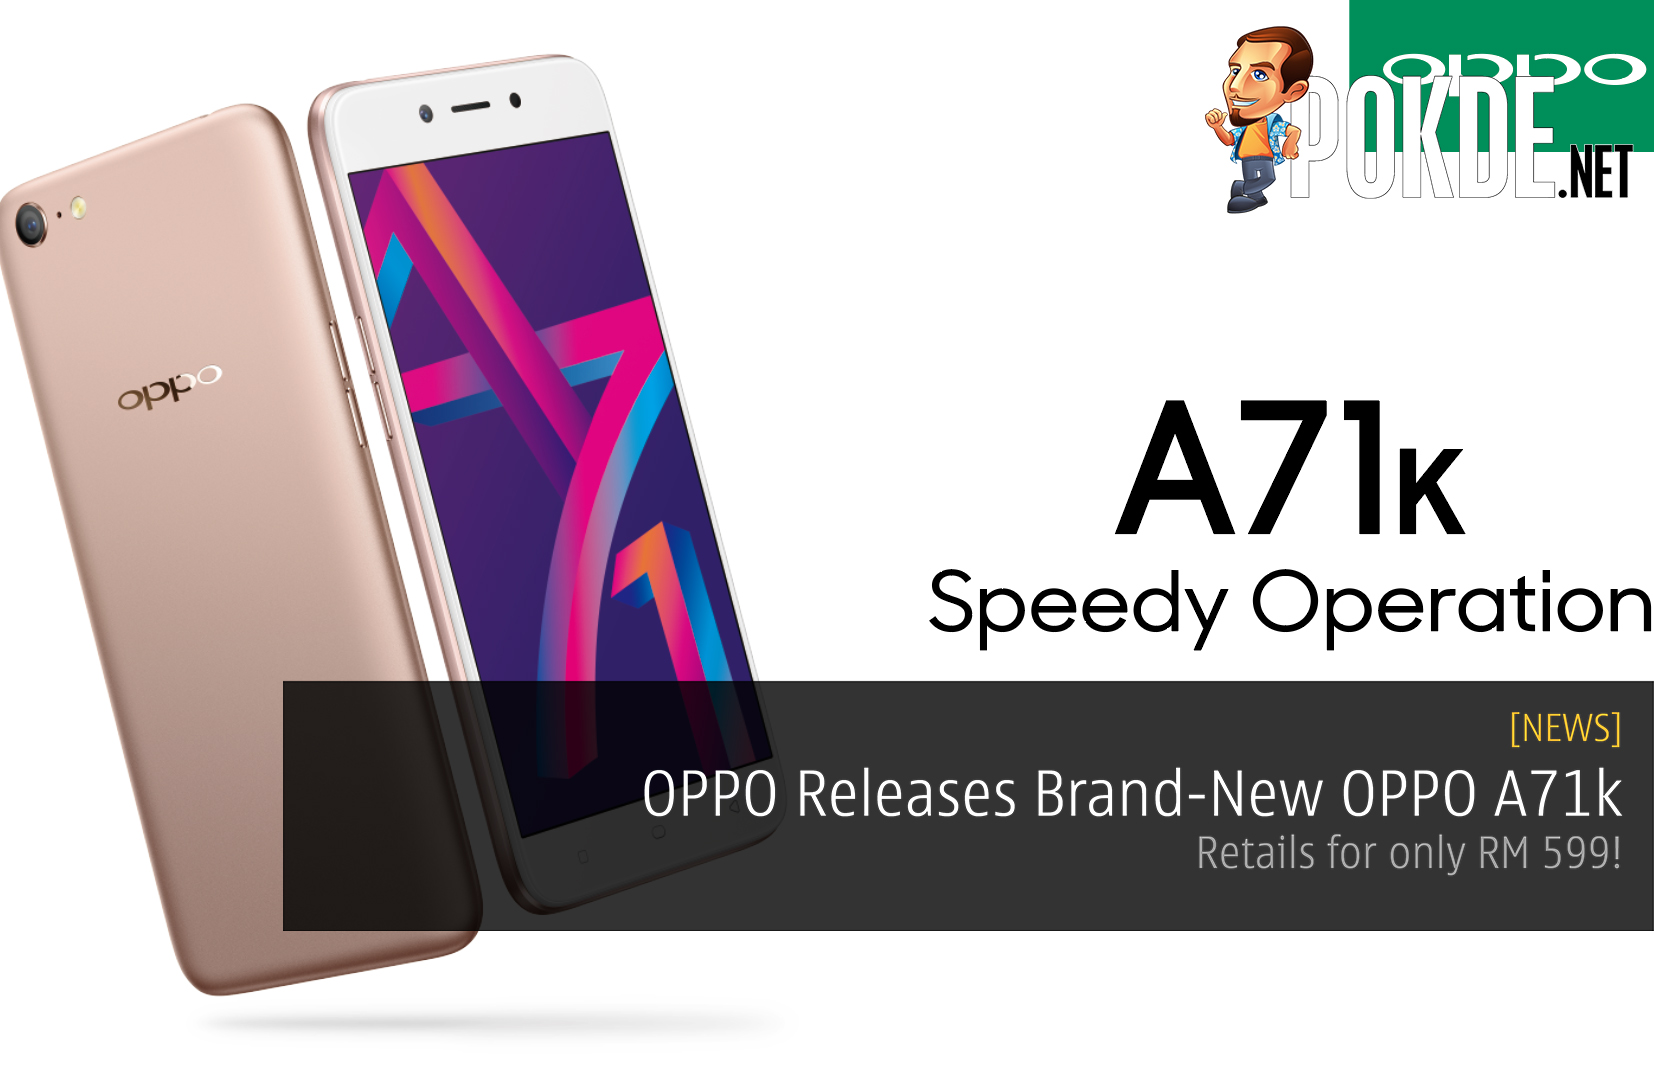 OPPO Releases Brand-New OPPO A71k - Retails for only RM 599! 30